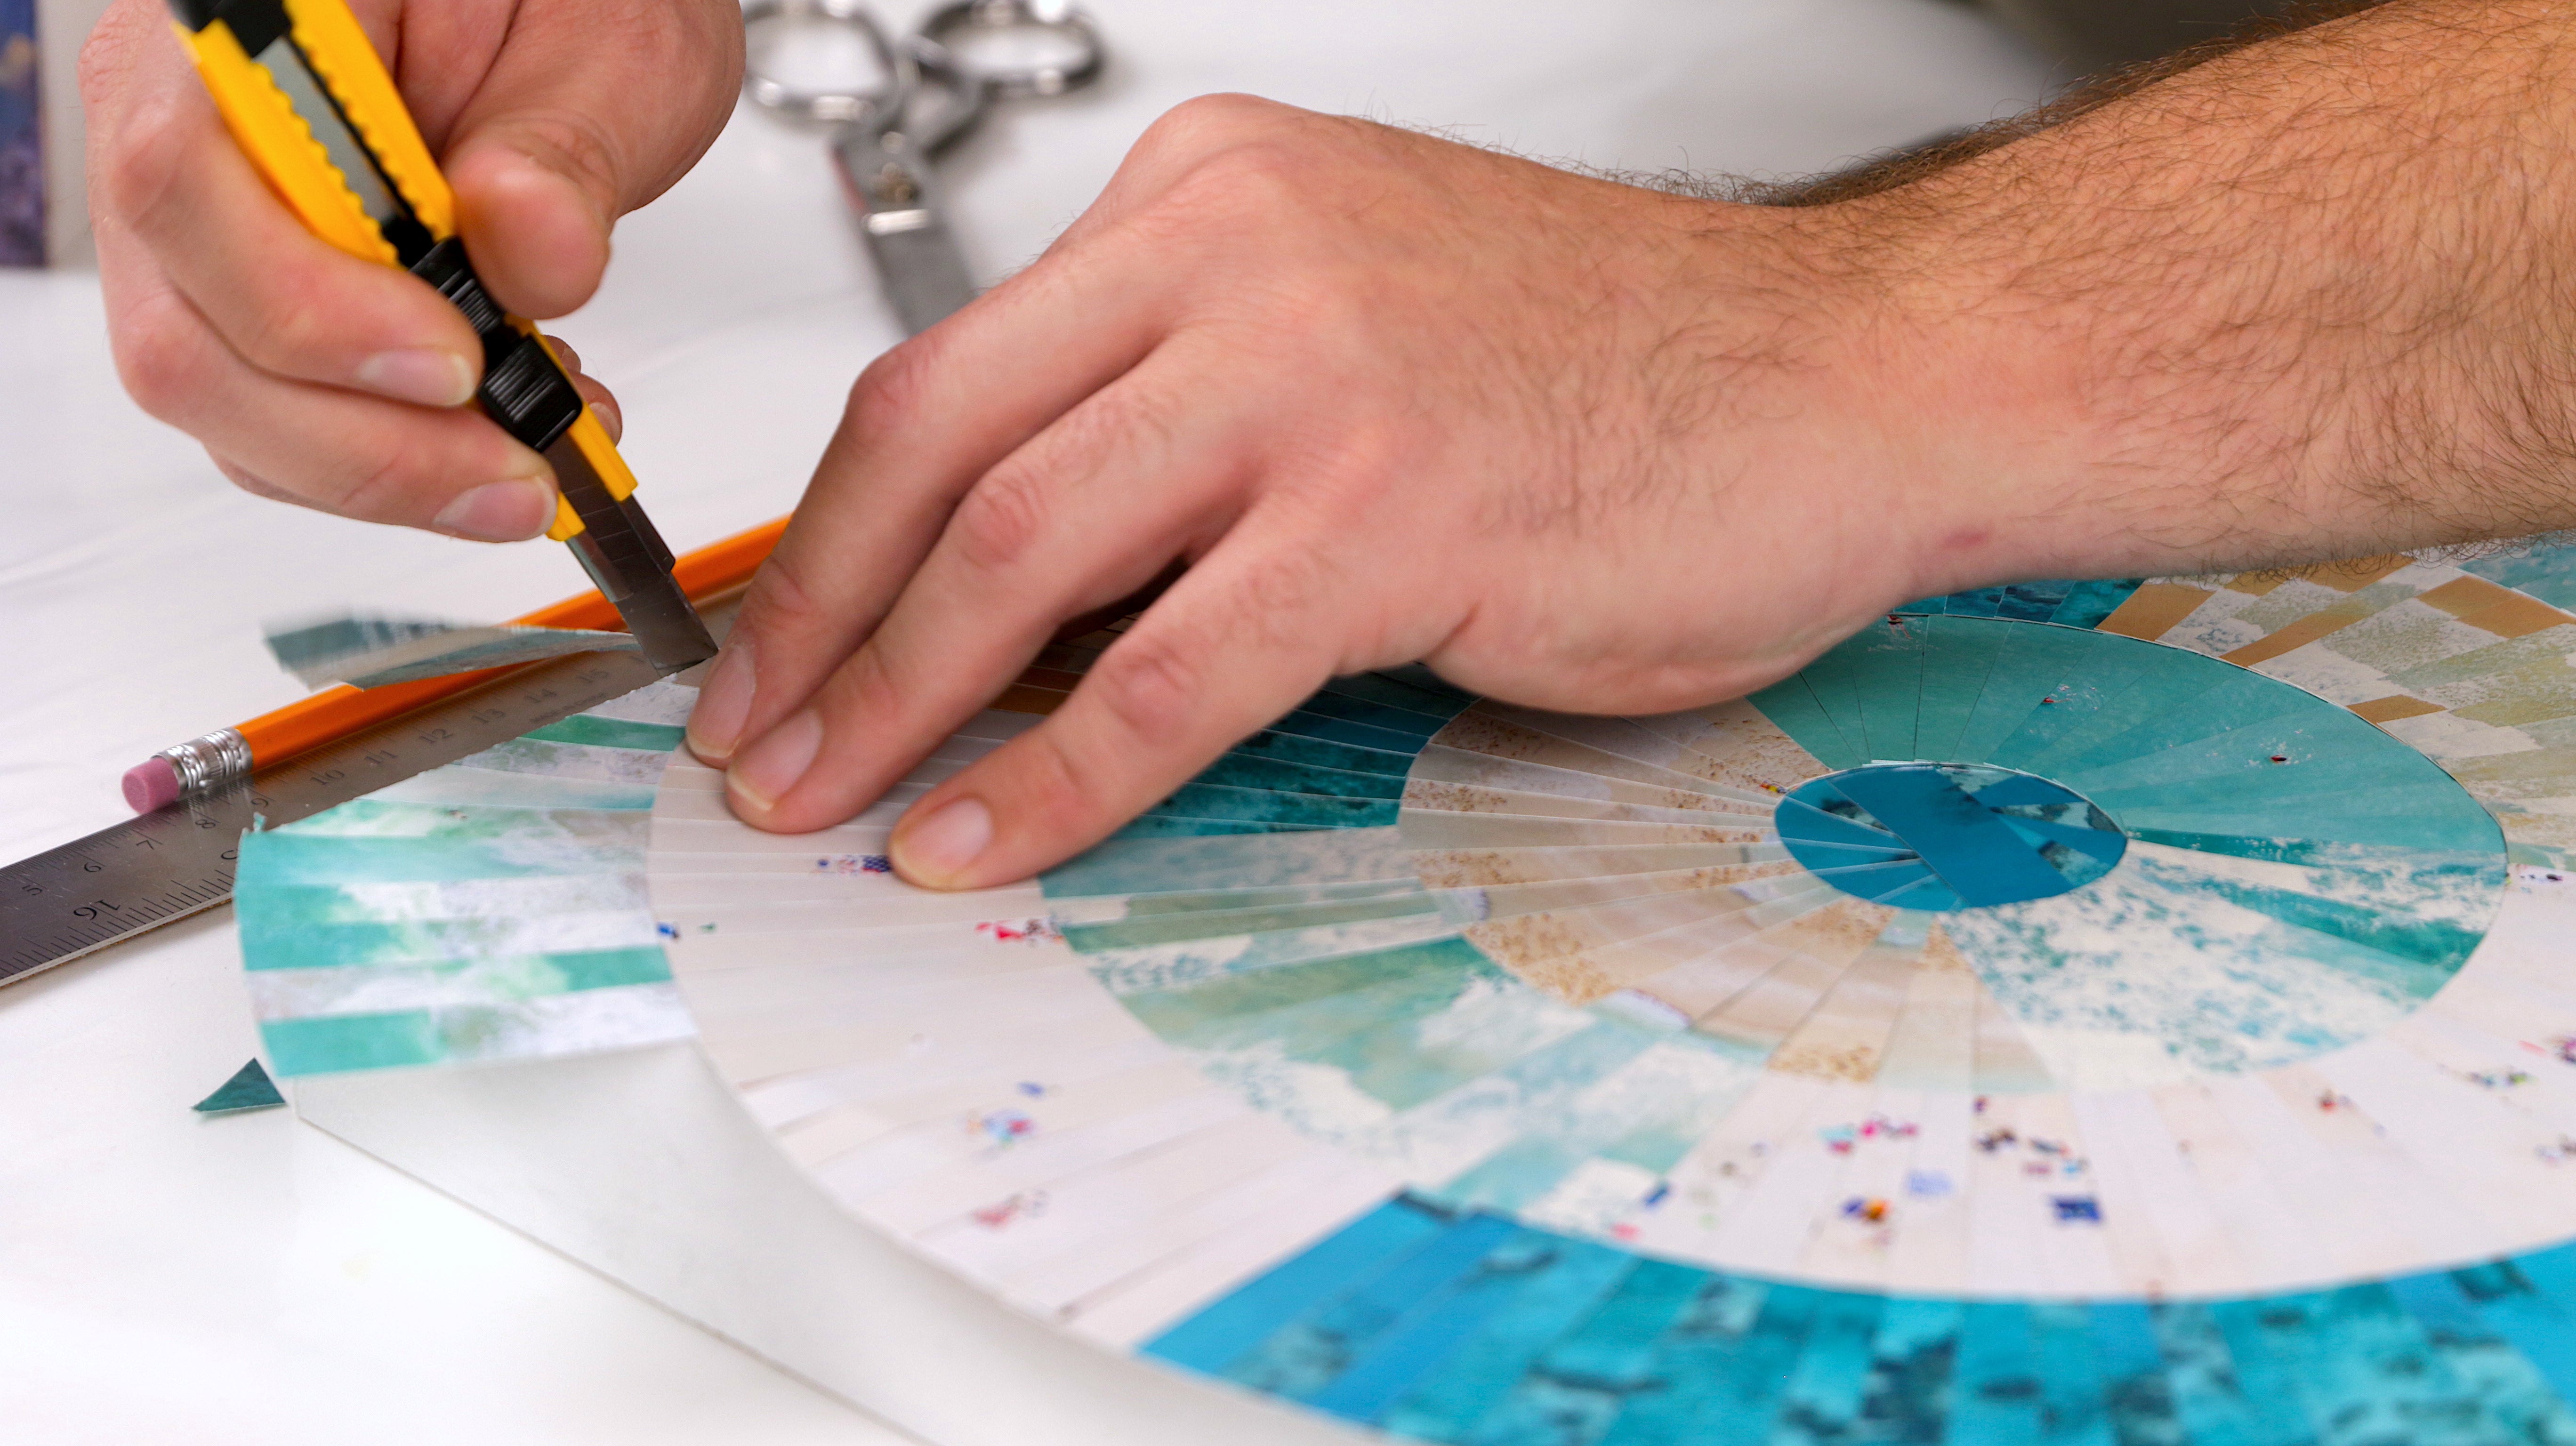 how to resin paper collage art: use a utility knife to trim off excess paper